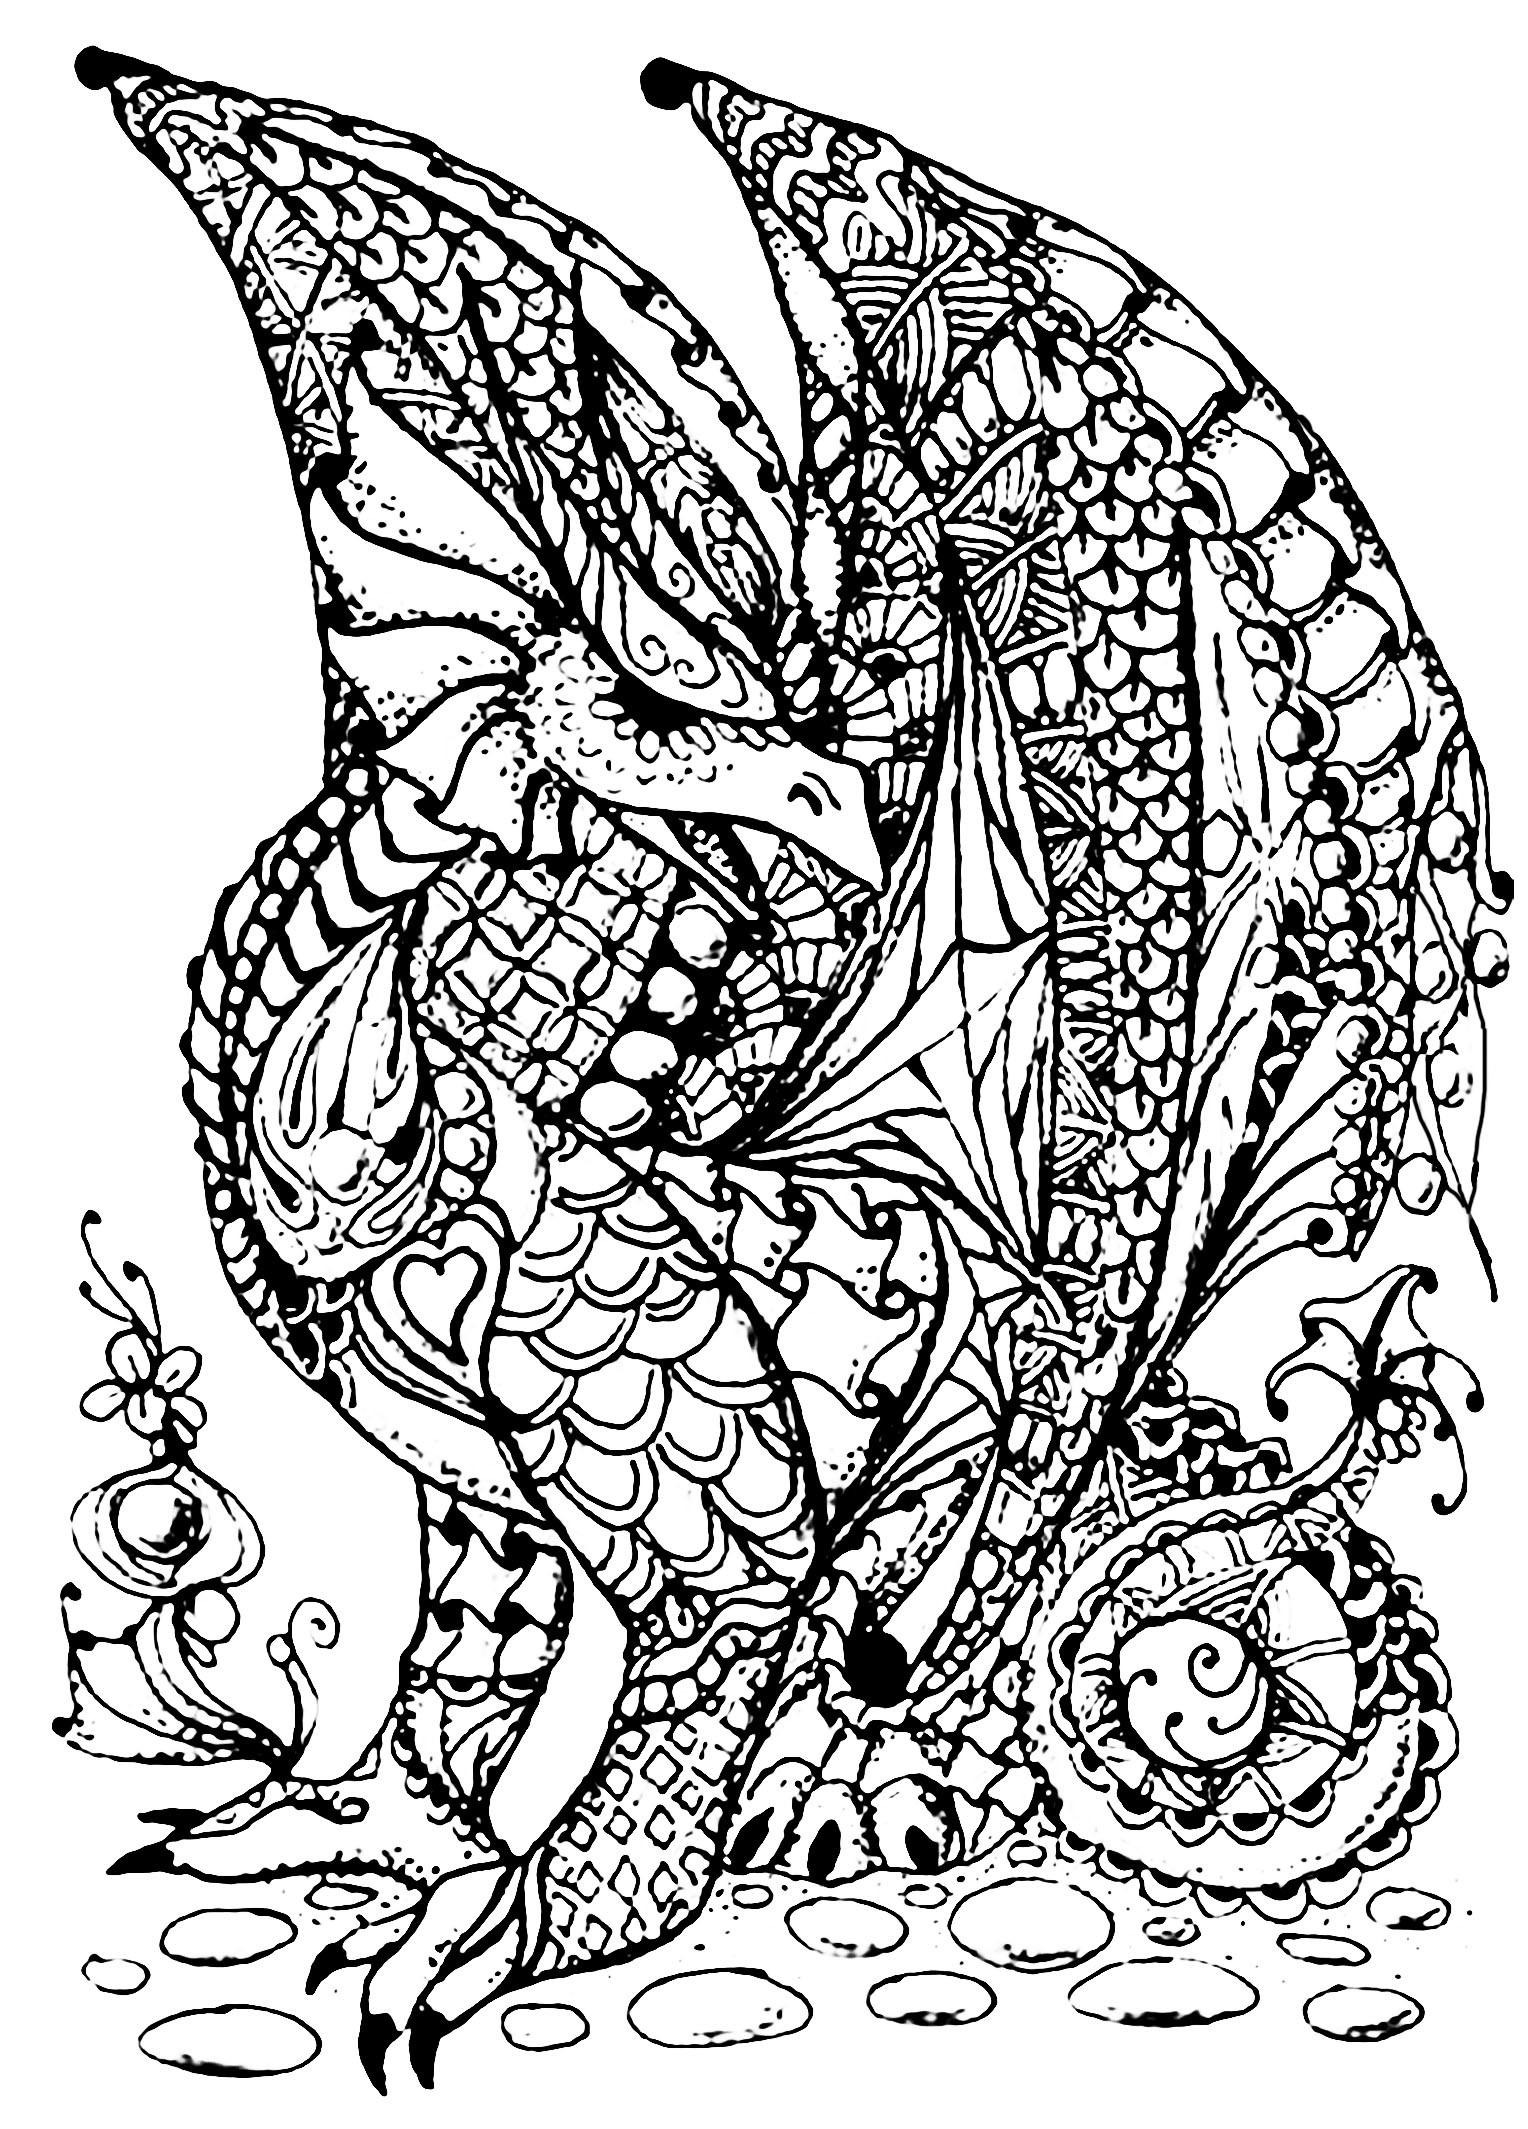 Dragon Coloring Books For Adults
 Dragon full of scales Dragons Adult Coloring Pages